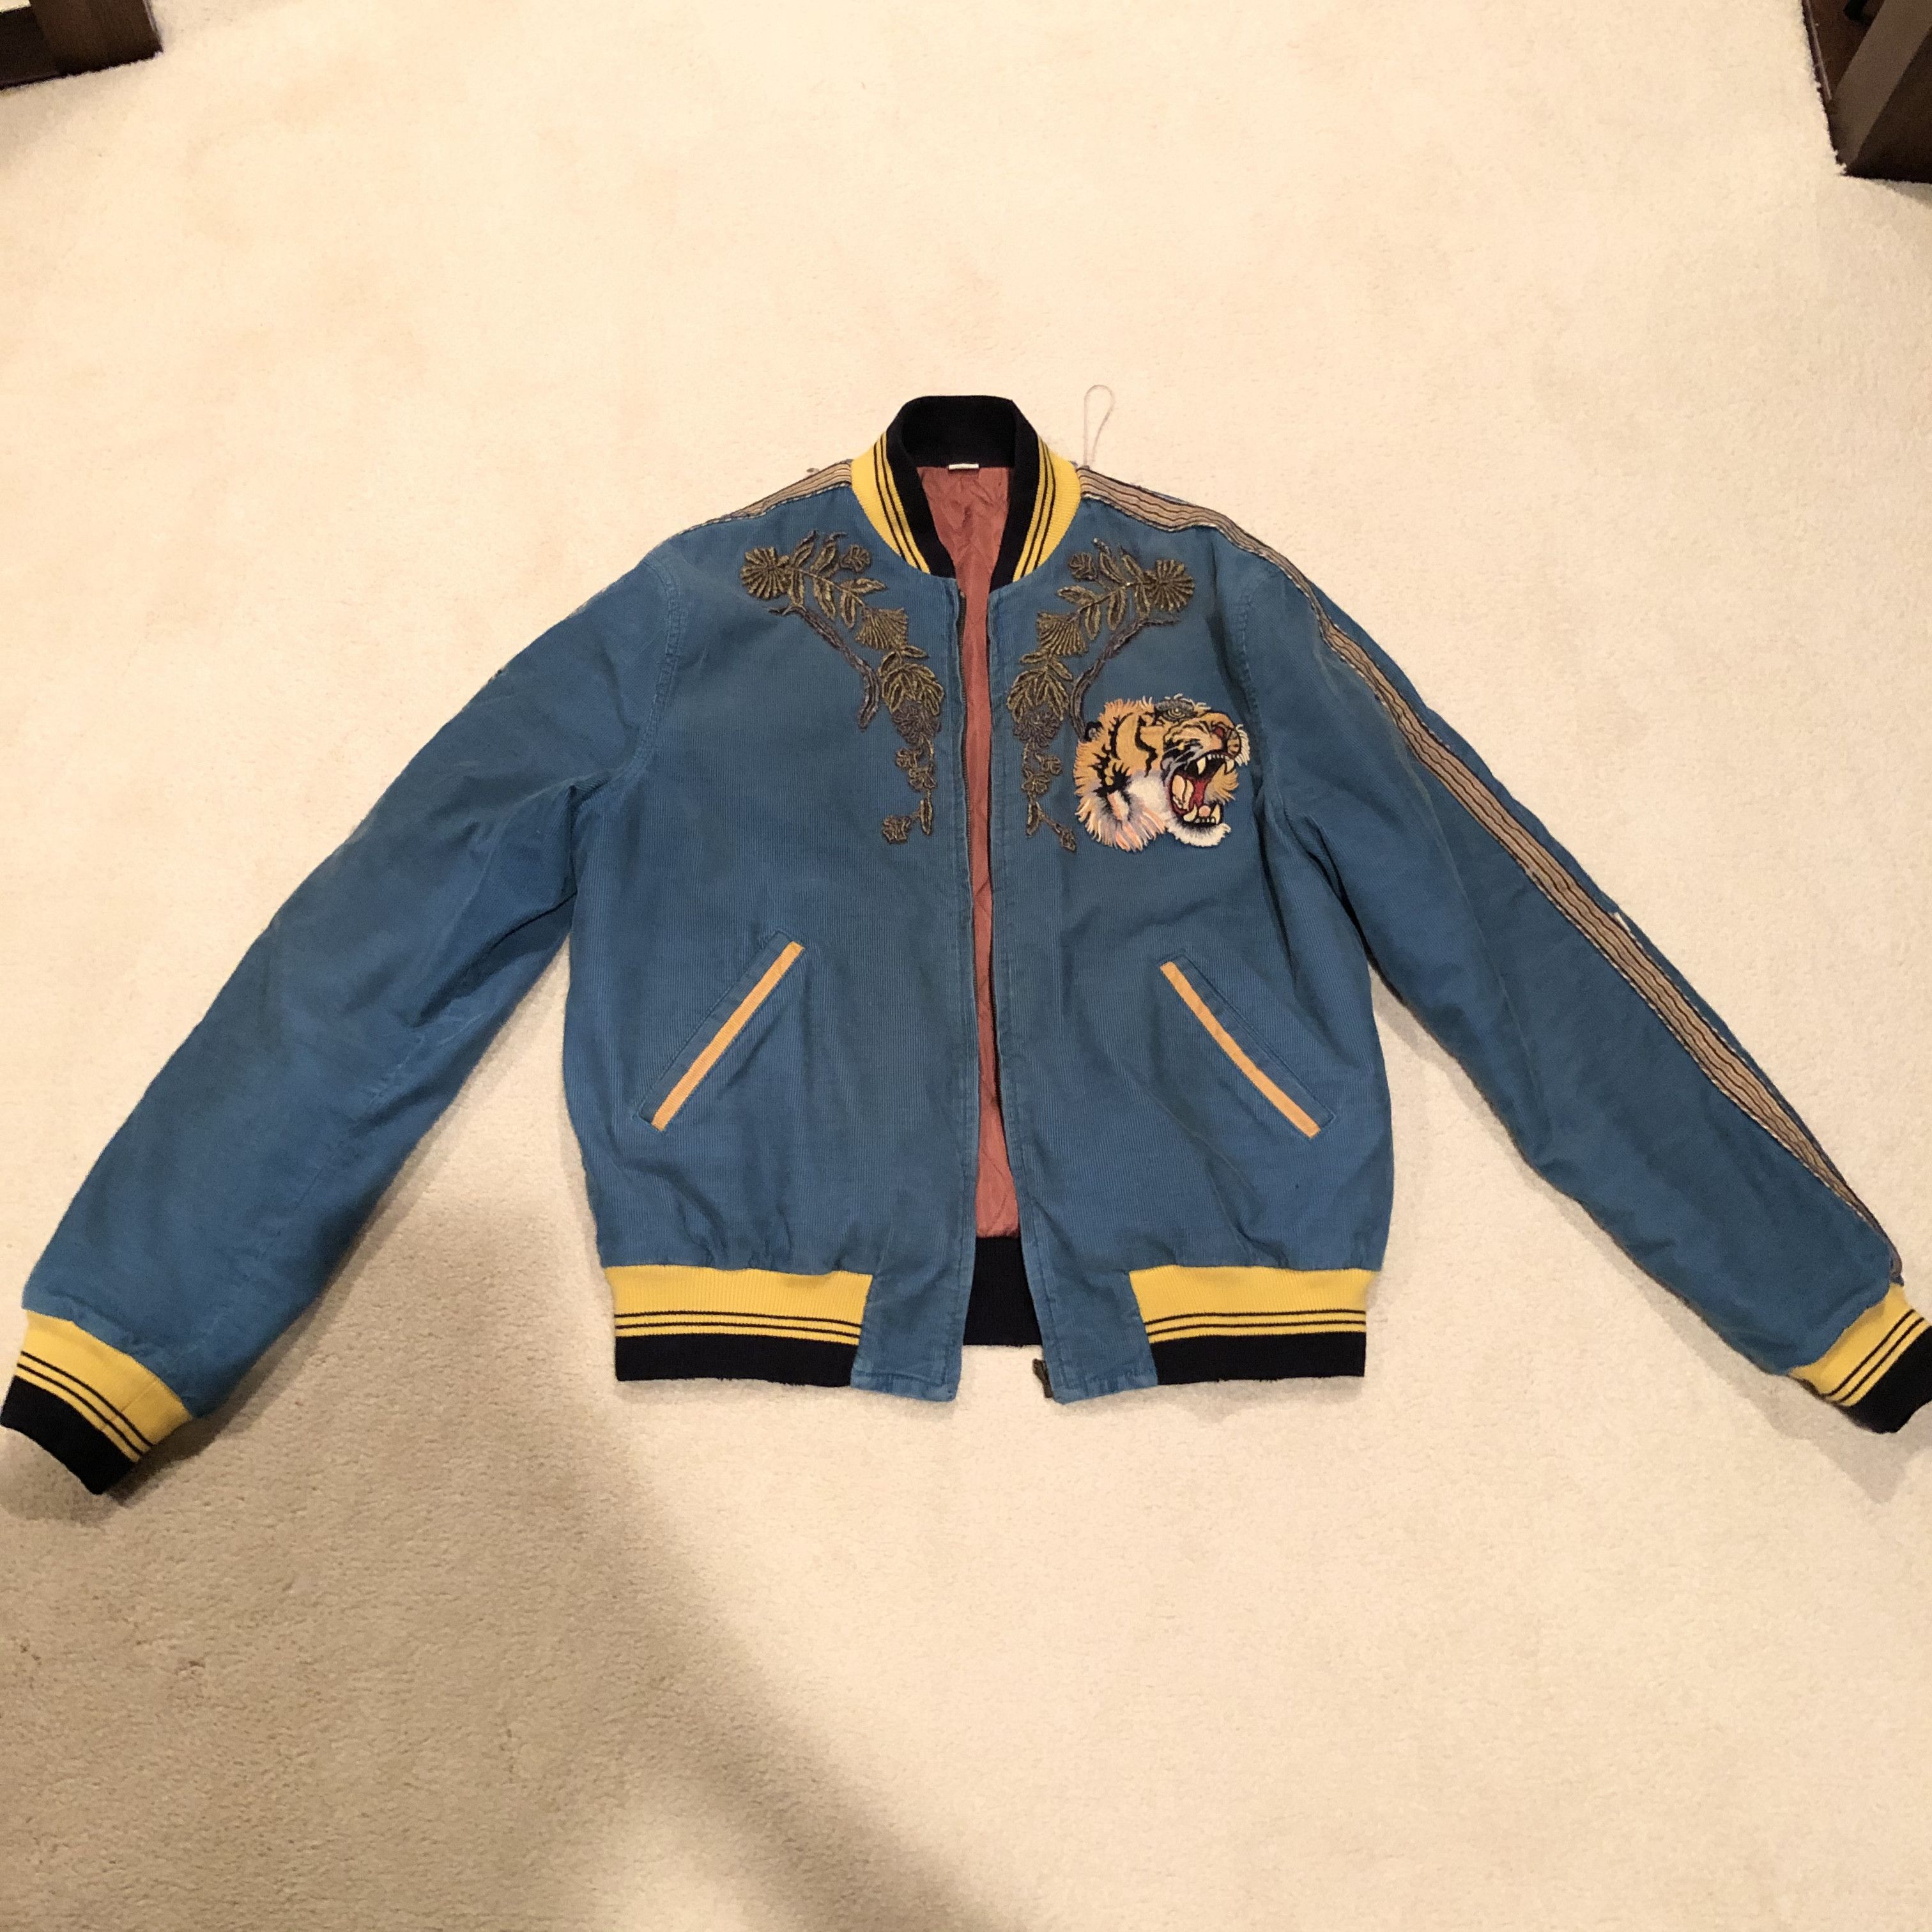 Gucci Love Life Is Gucci Bomber Jacket - Tagotee